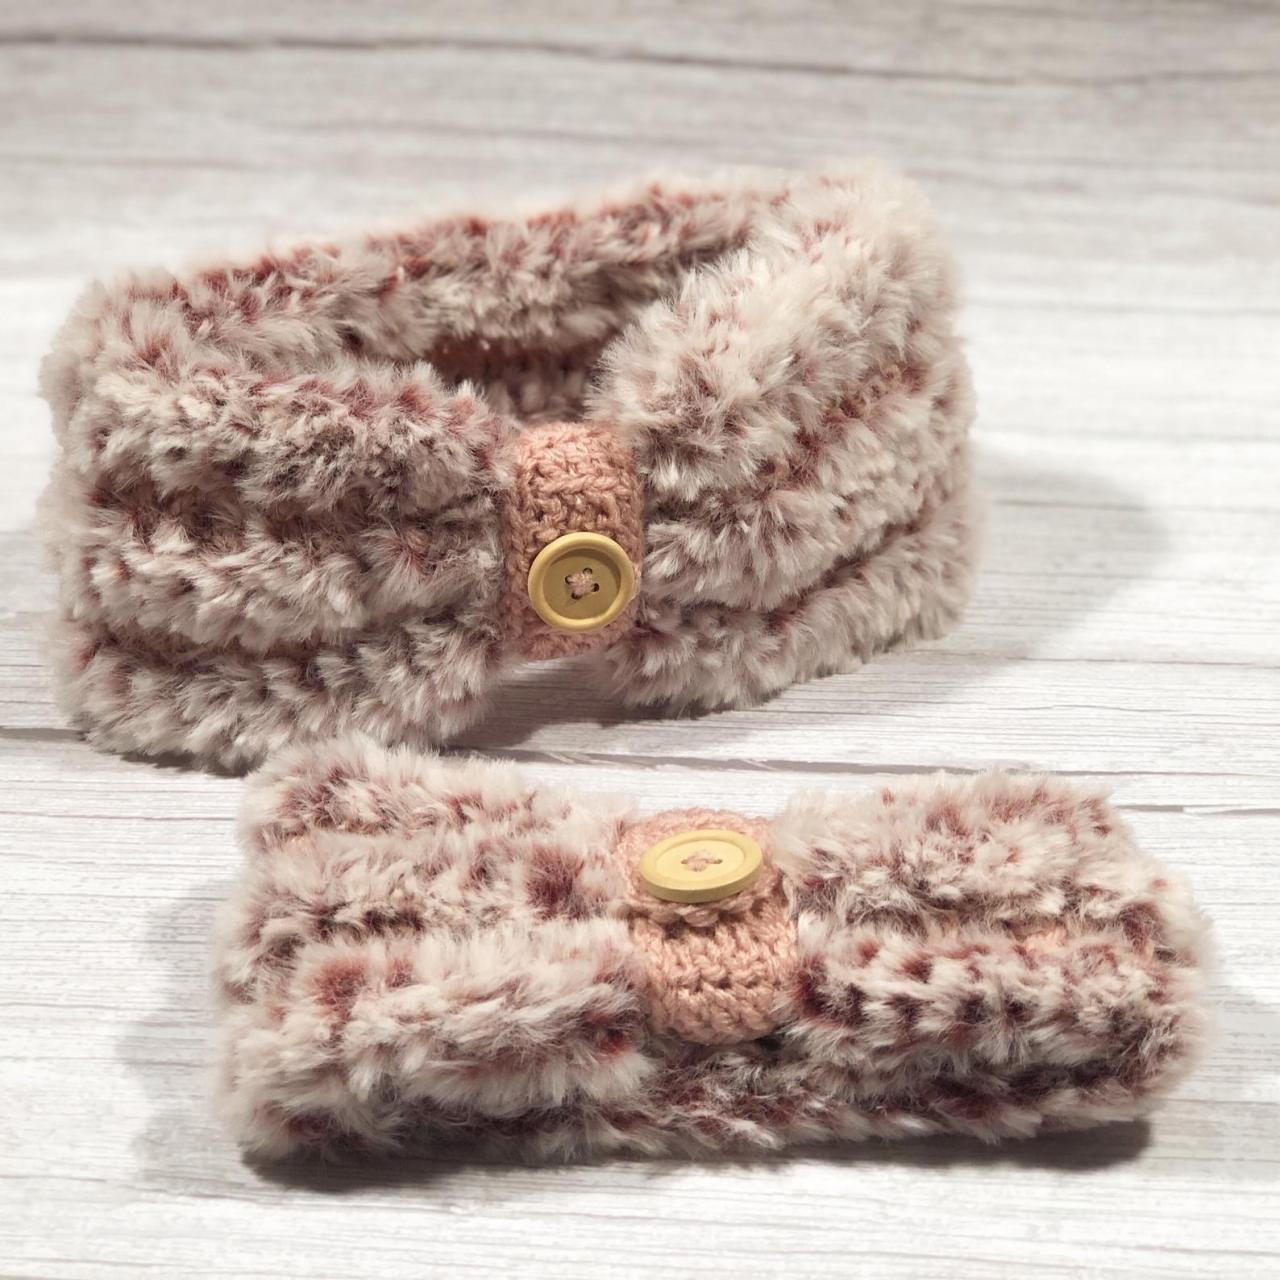 Crochet earwarmers (2 peaces) 2 in 1 (with or without button ring), Adult headband, Teen headband, Soft Fake Furr, Mom and Doughter set